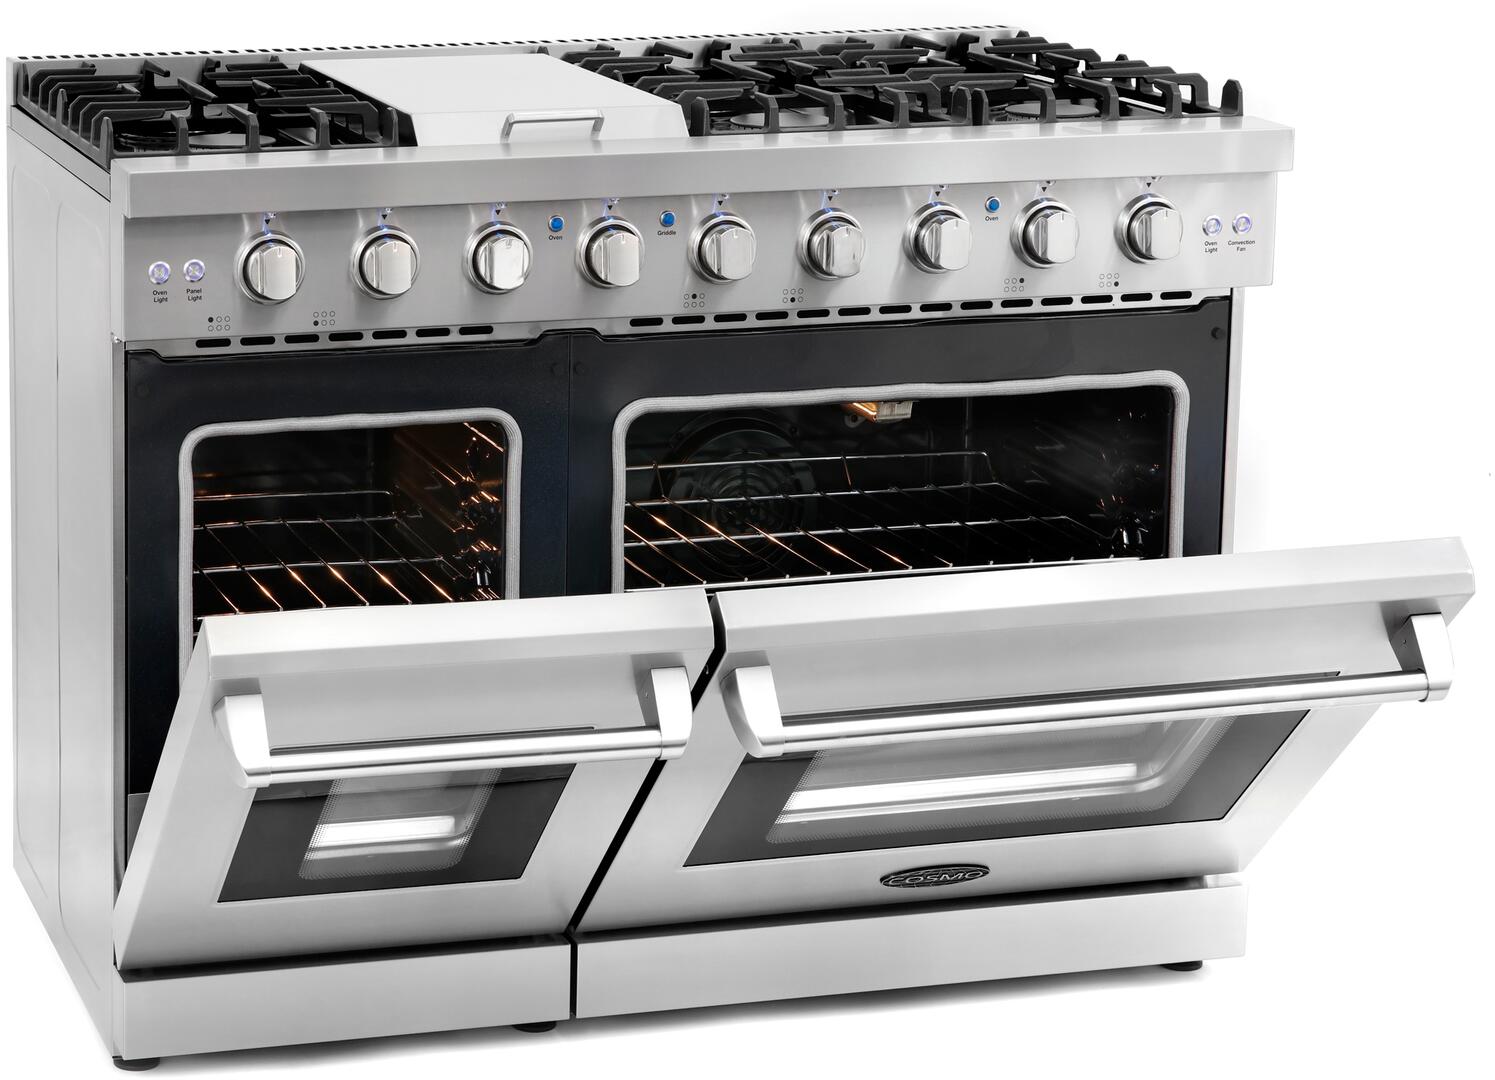 Cosmo - 48 in. 6.8 cu. ft. Double Oven Commercial Gas Range with Fan Assist Convection Oven in Stainless Steel Storage Drawer | COS-EPGR486G